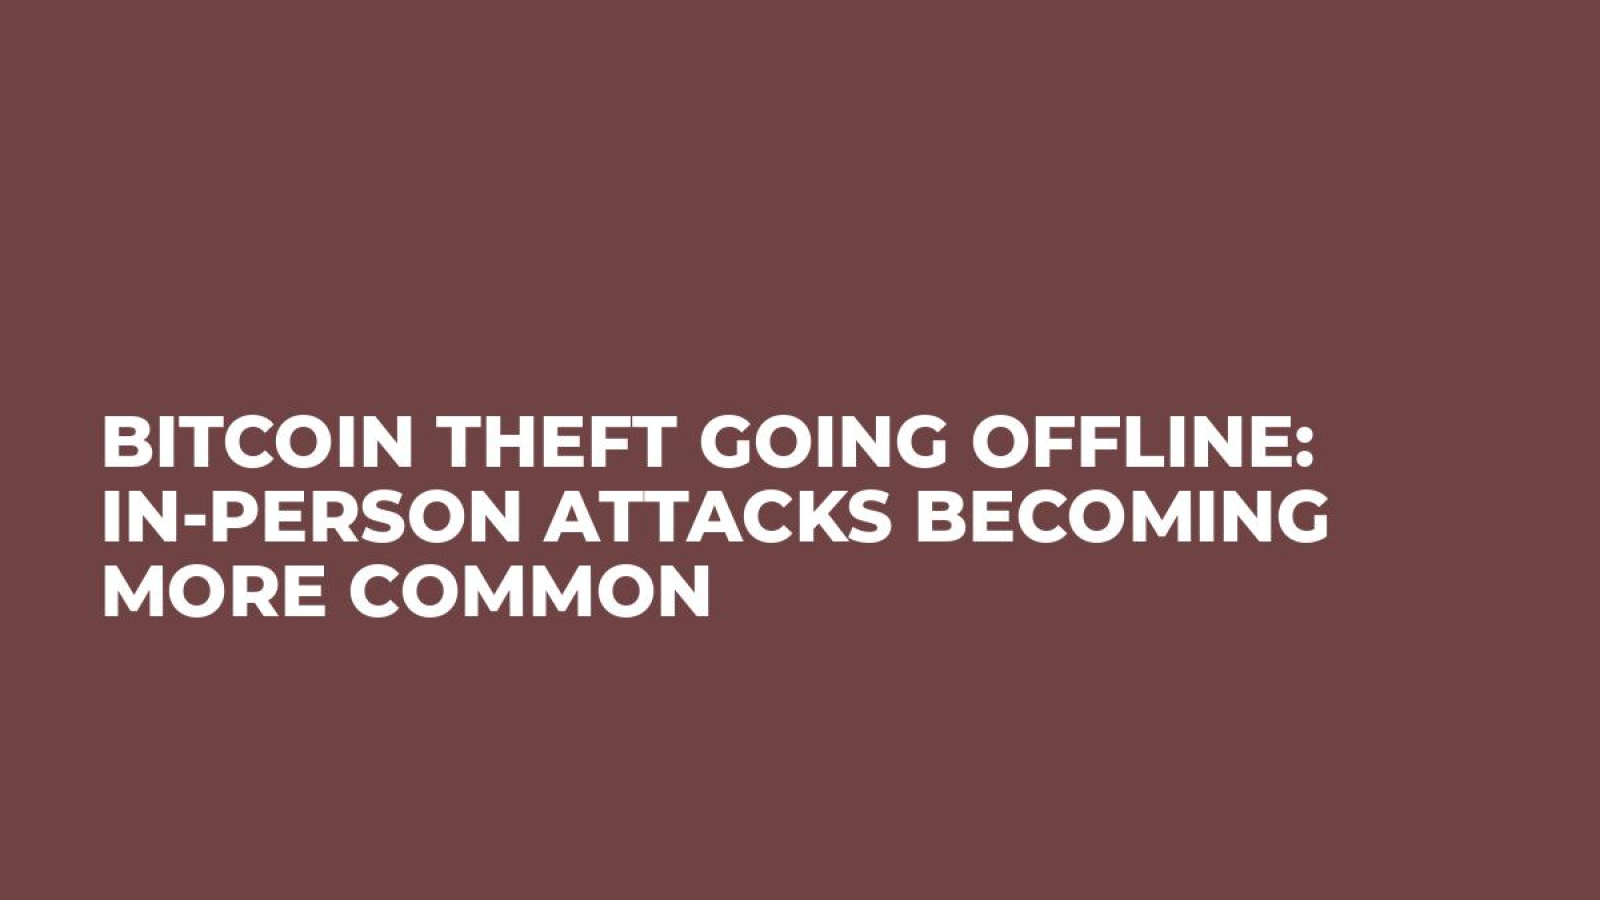 Bitcoin Theft Going Offline: In-Person Attacks Becoming More Common